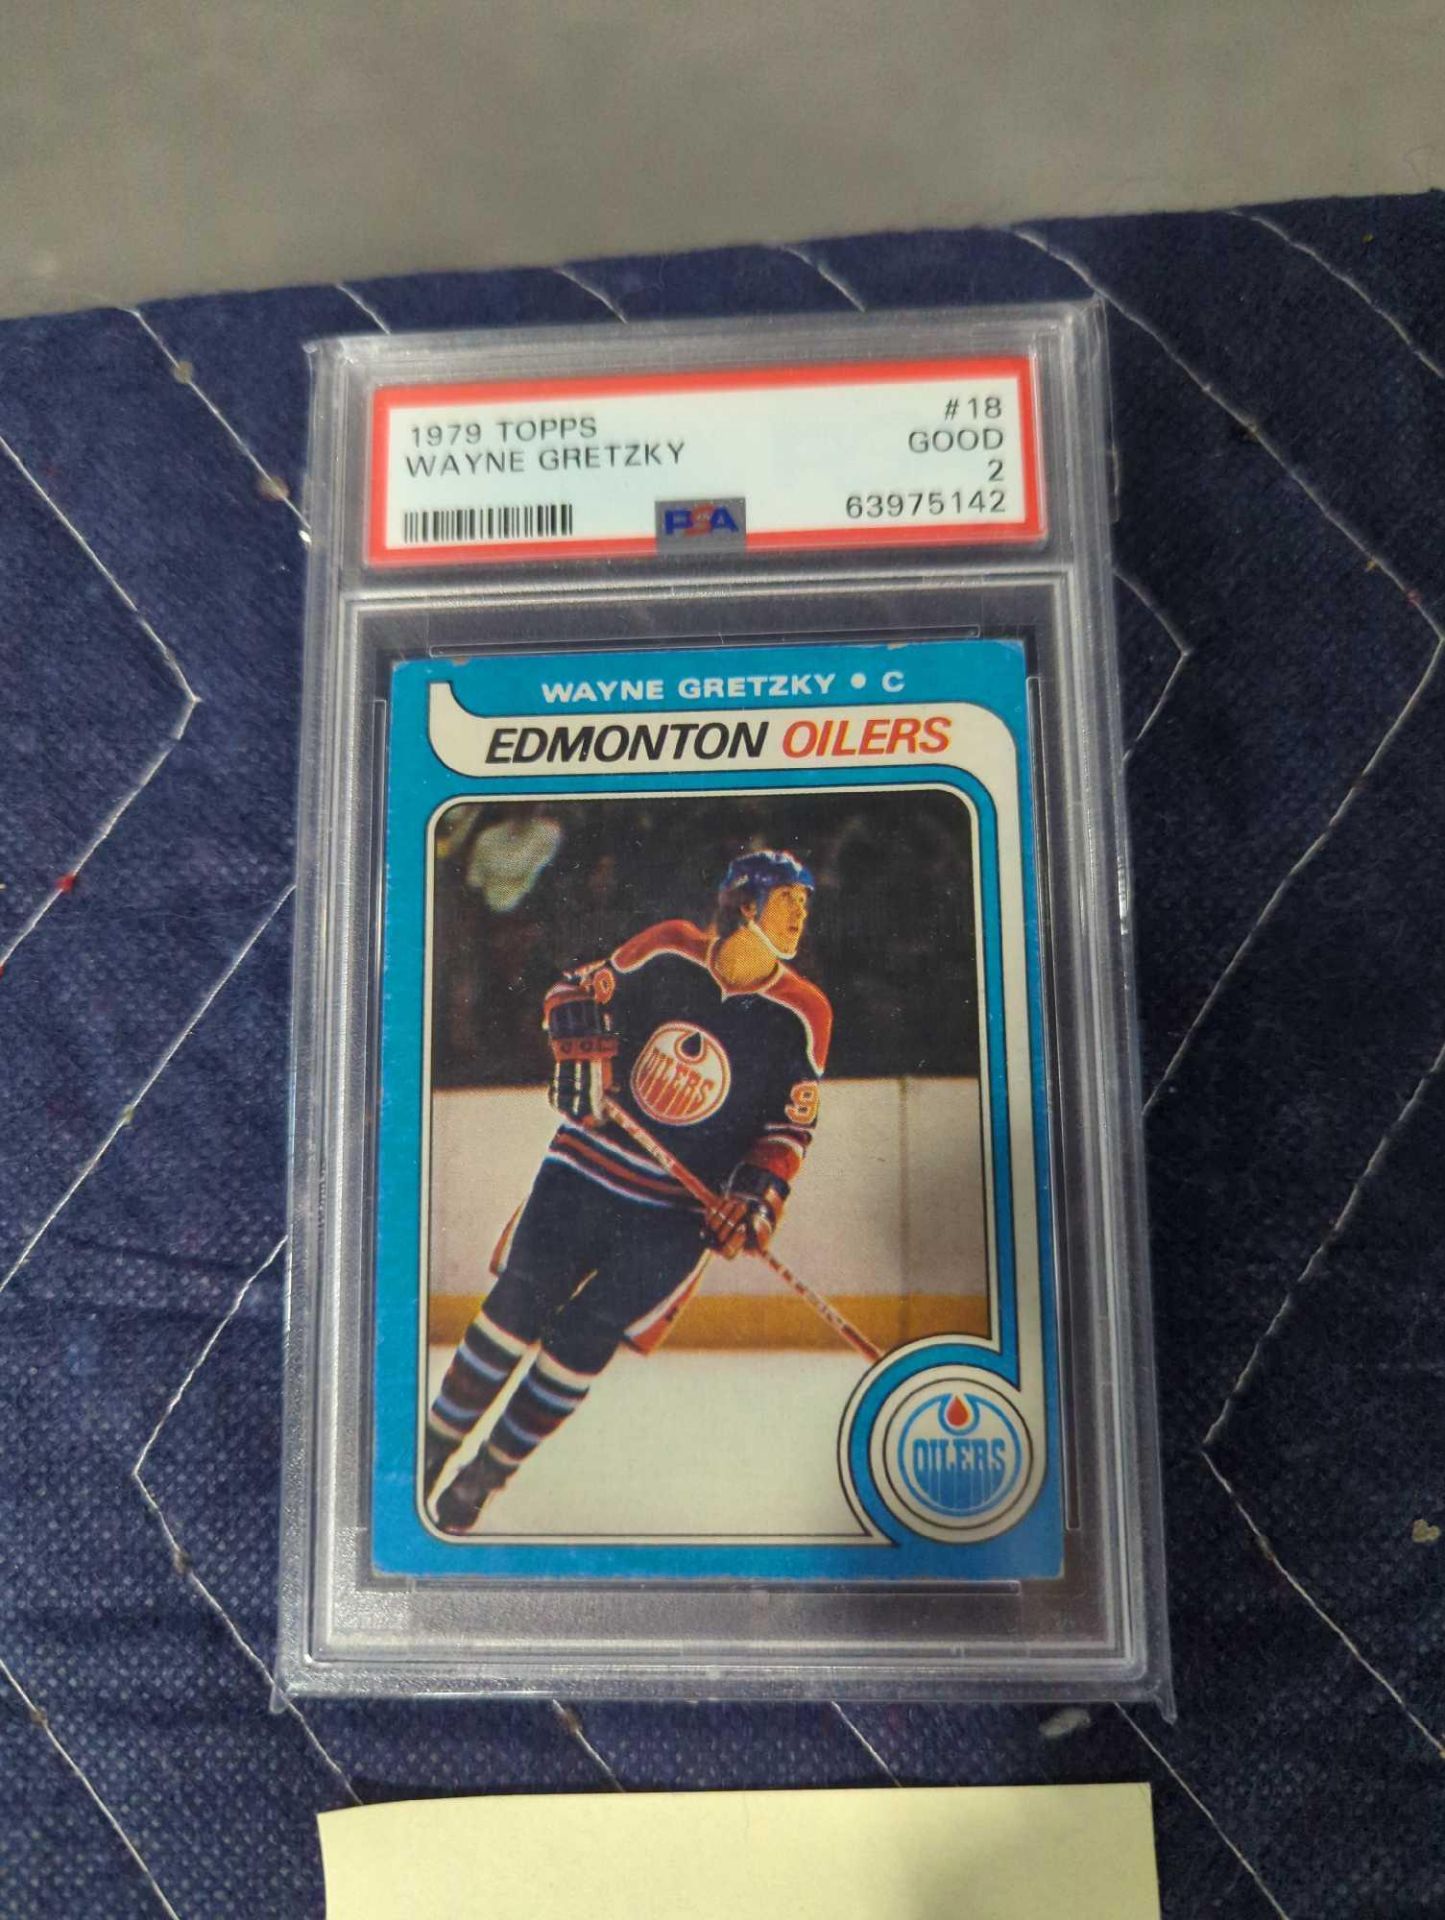 1978 Topps Wayne Gretzky Rookie Card PSA Graded Rookie Card - Image 2 of 5